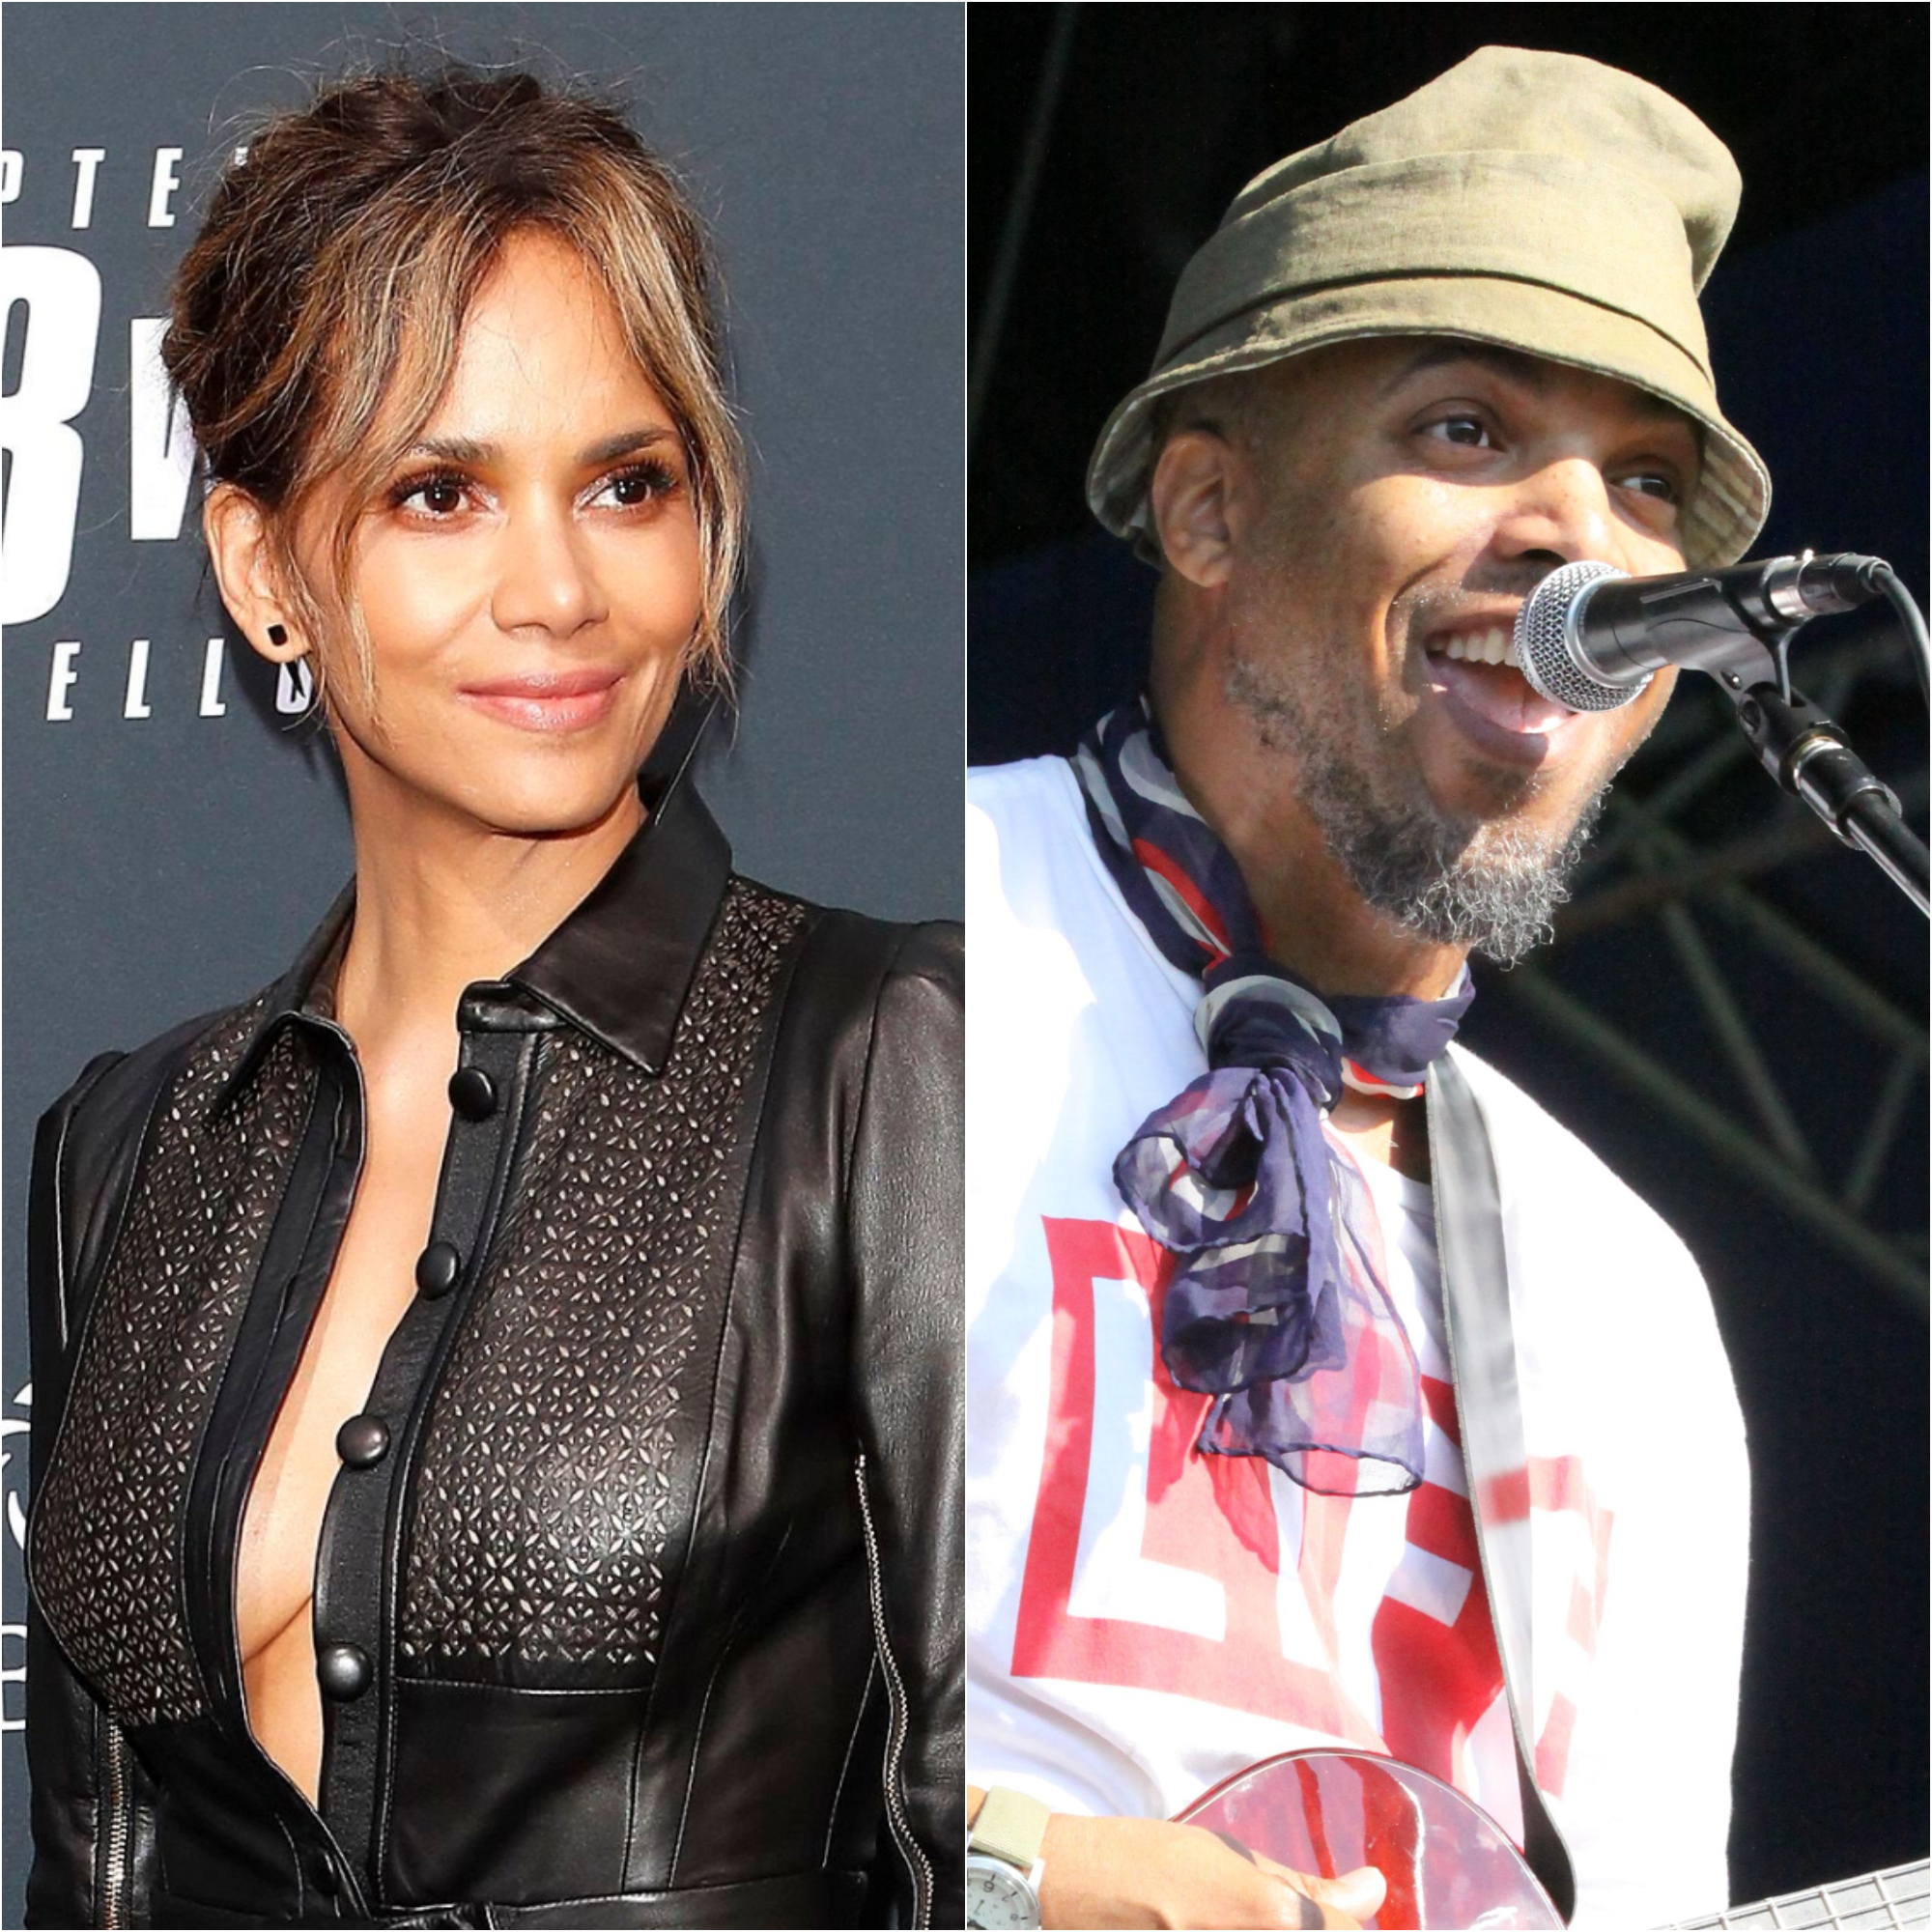 Who is halle berry dating now